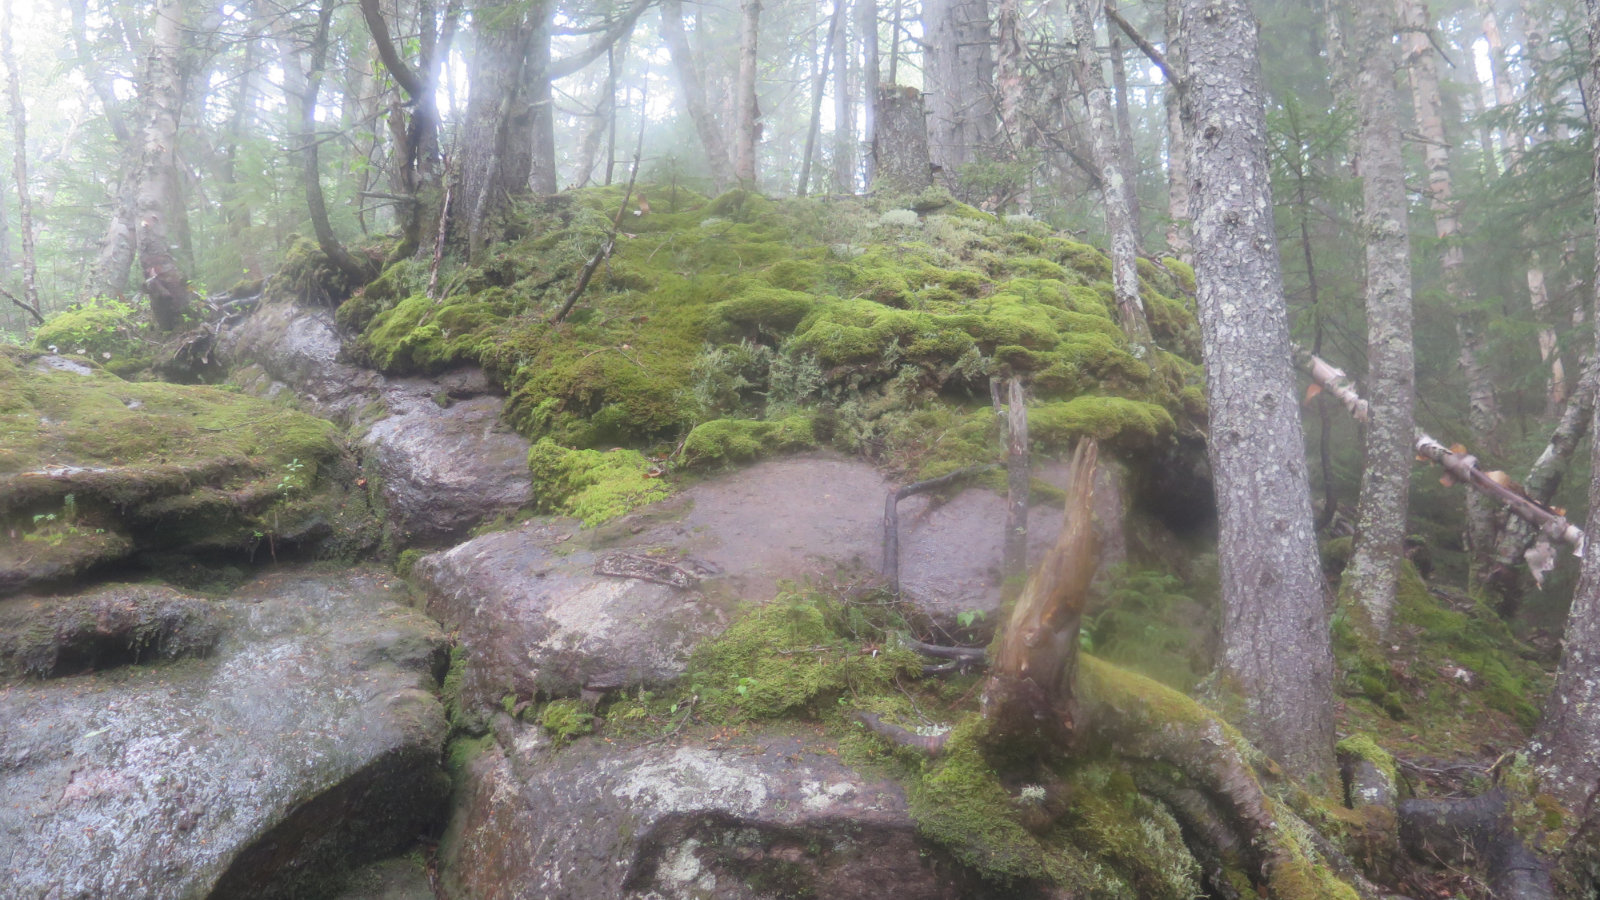 Mosses growing on a large rock. Imp Trail, Carter Range, White Mountain National Forest.